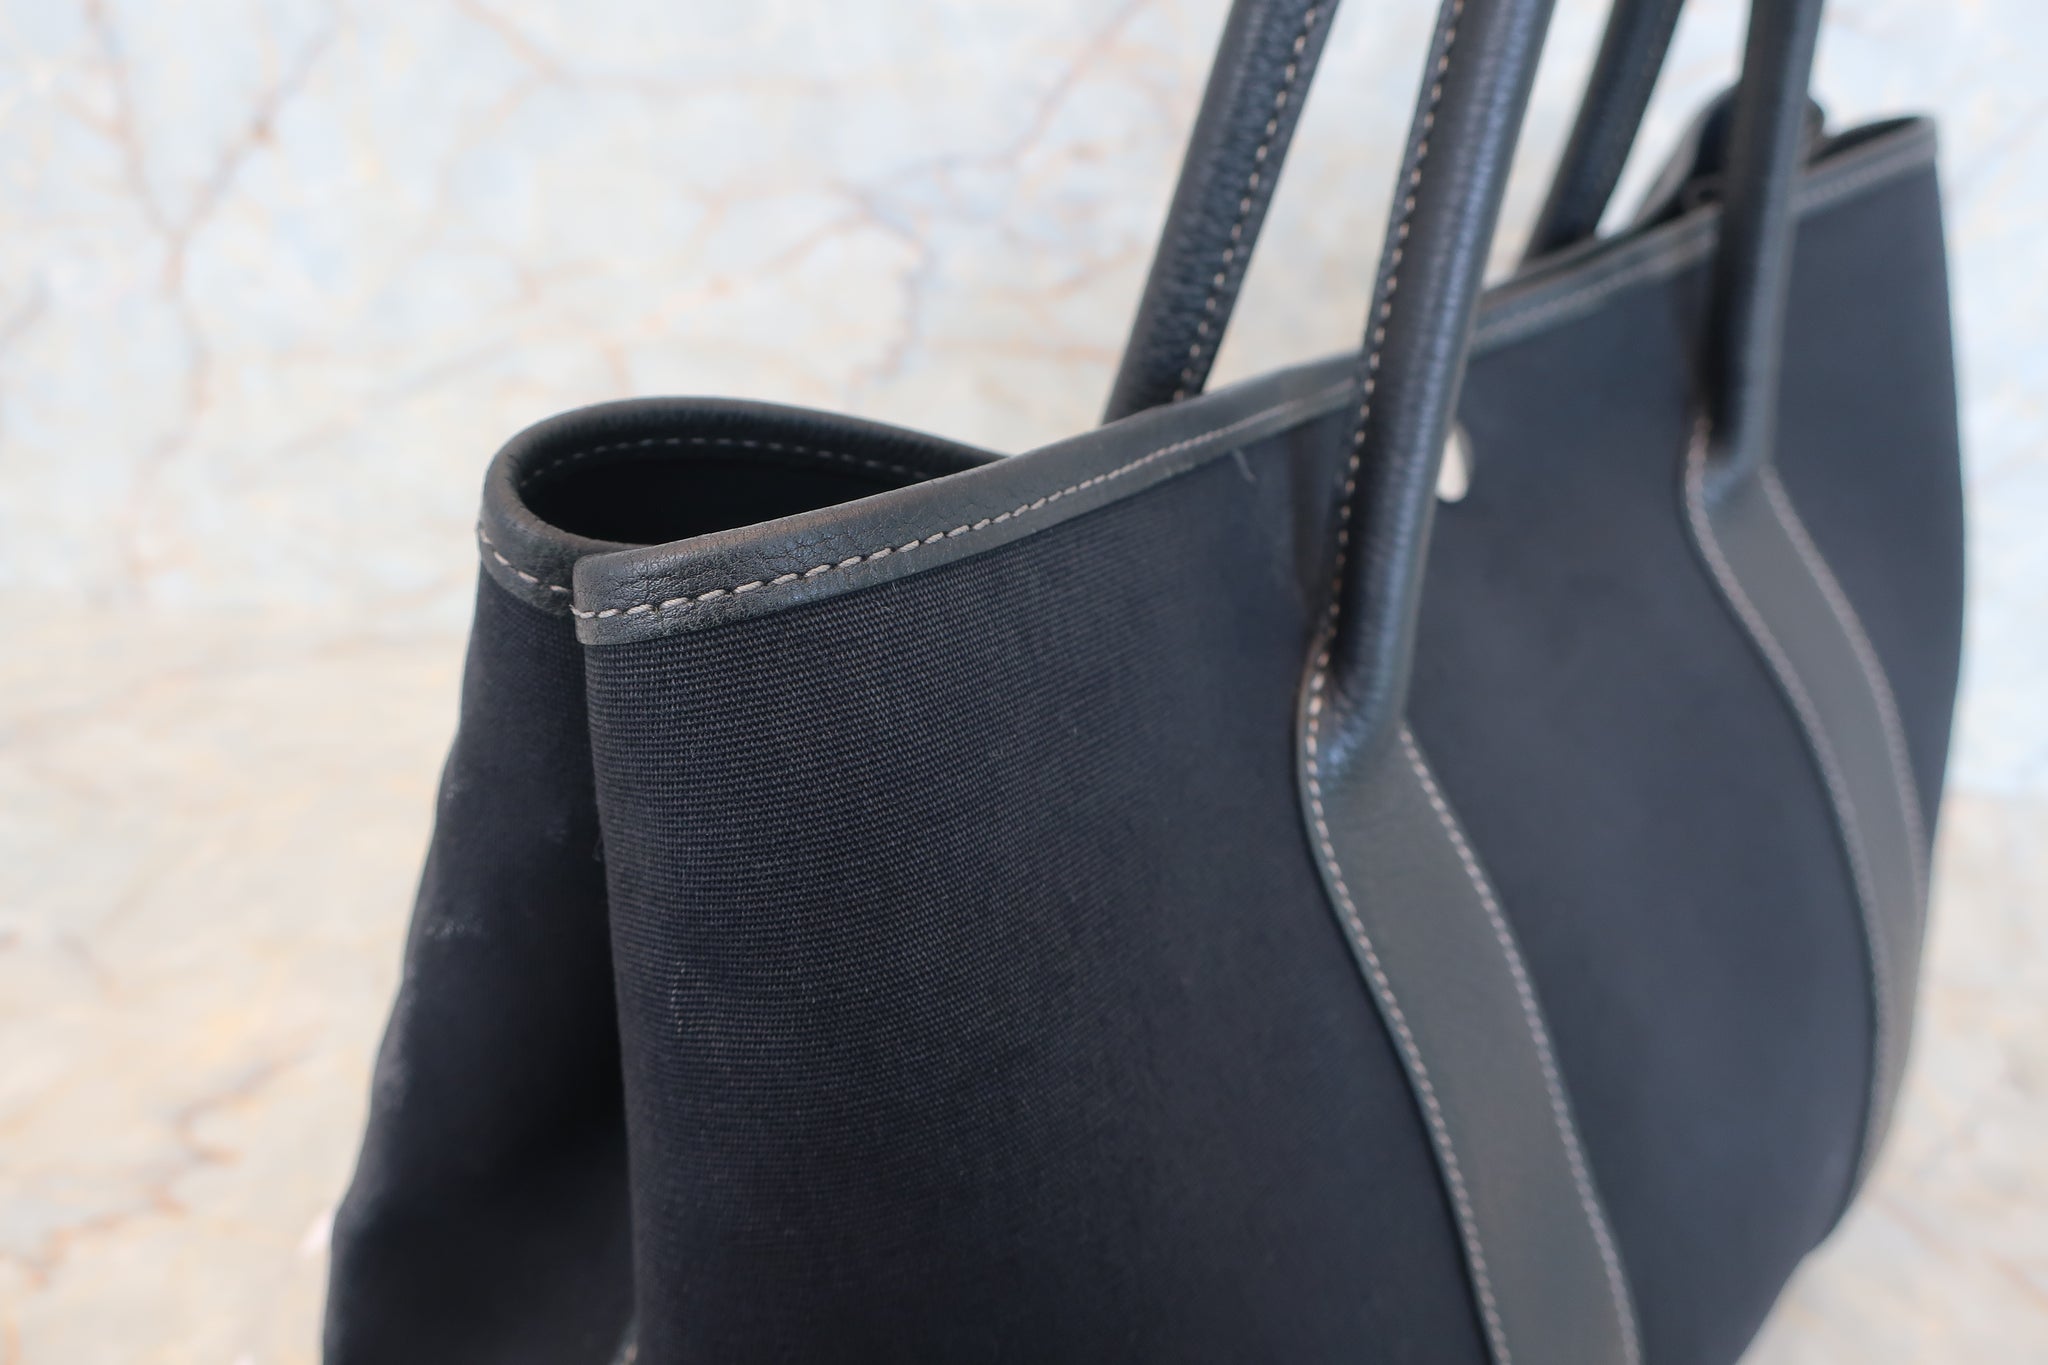 Hermes Black Canvas & Leather GARDEN PARTY PM Tote Bag